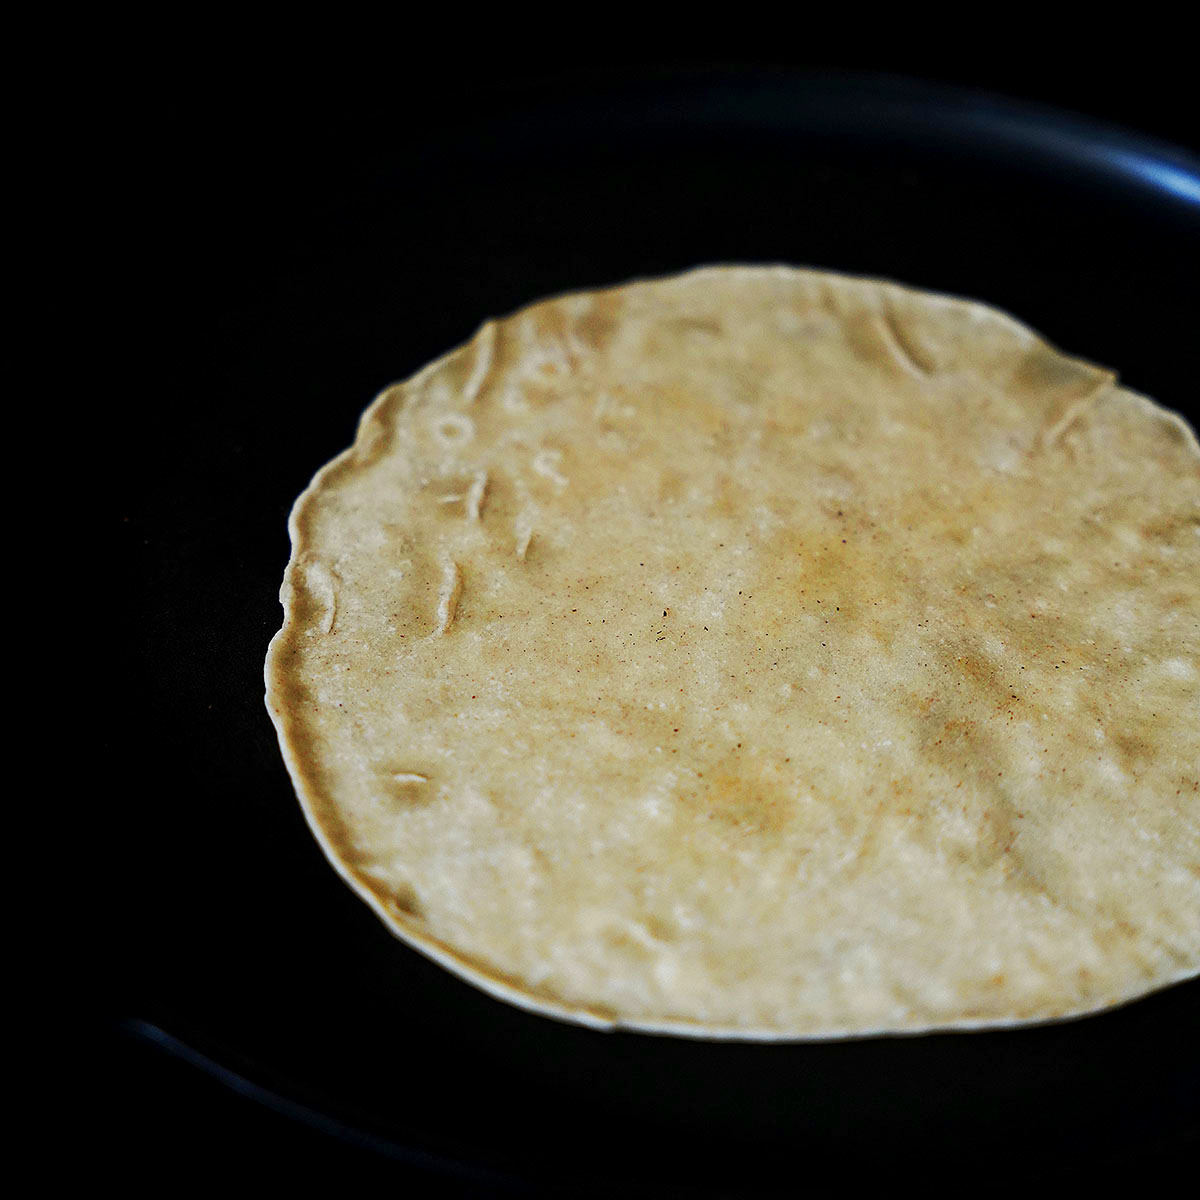 Cooking the dough disk on a skillet.